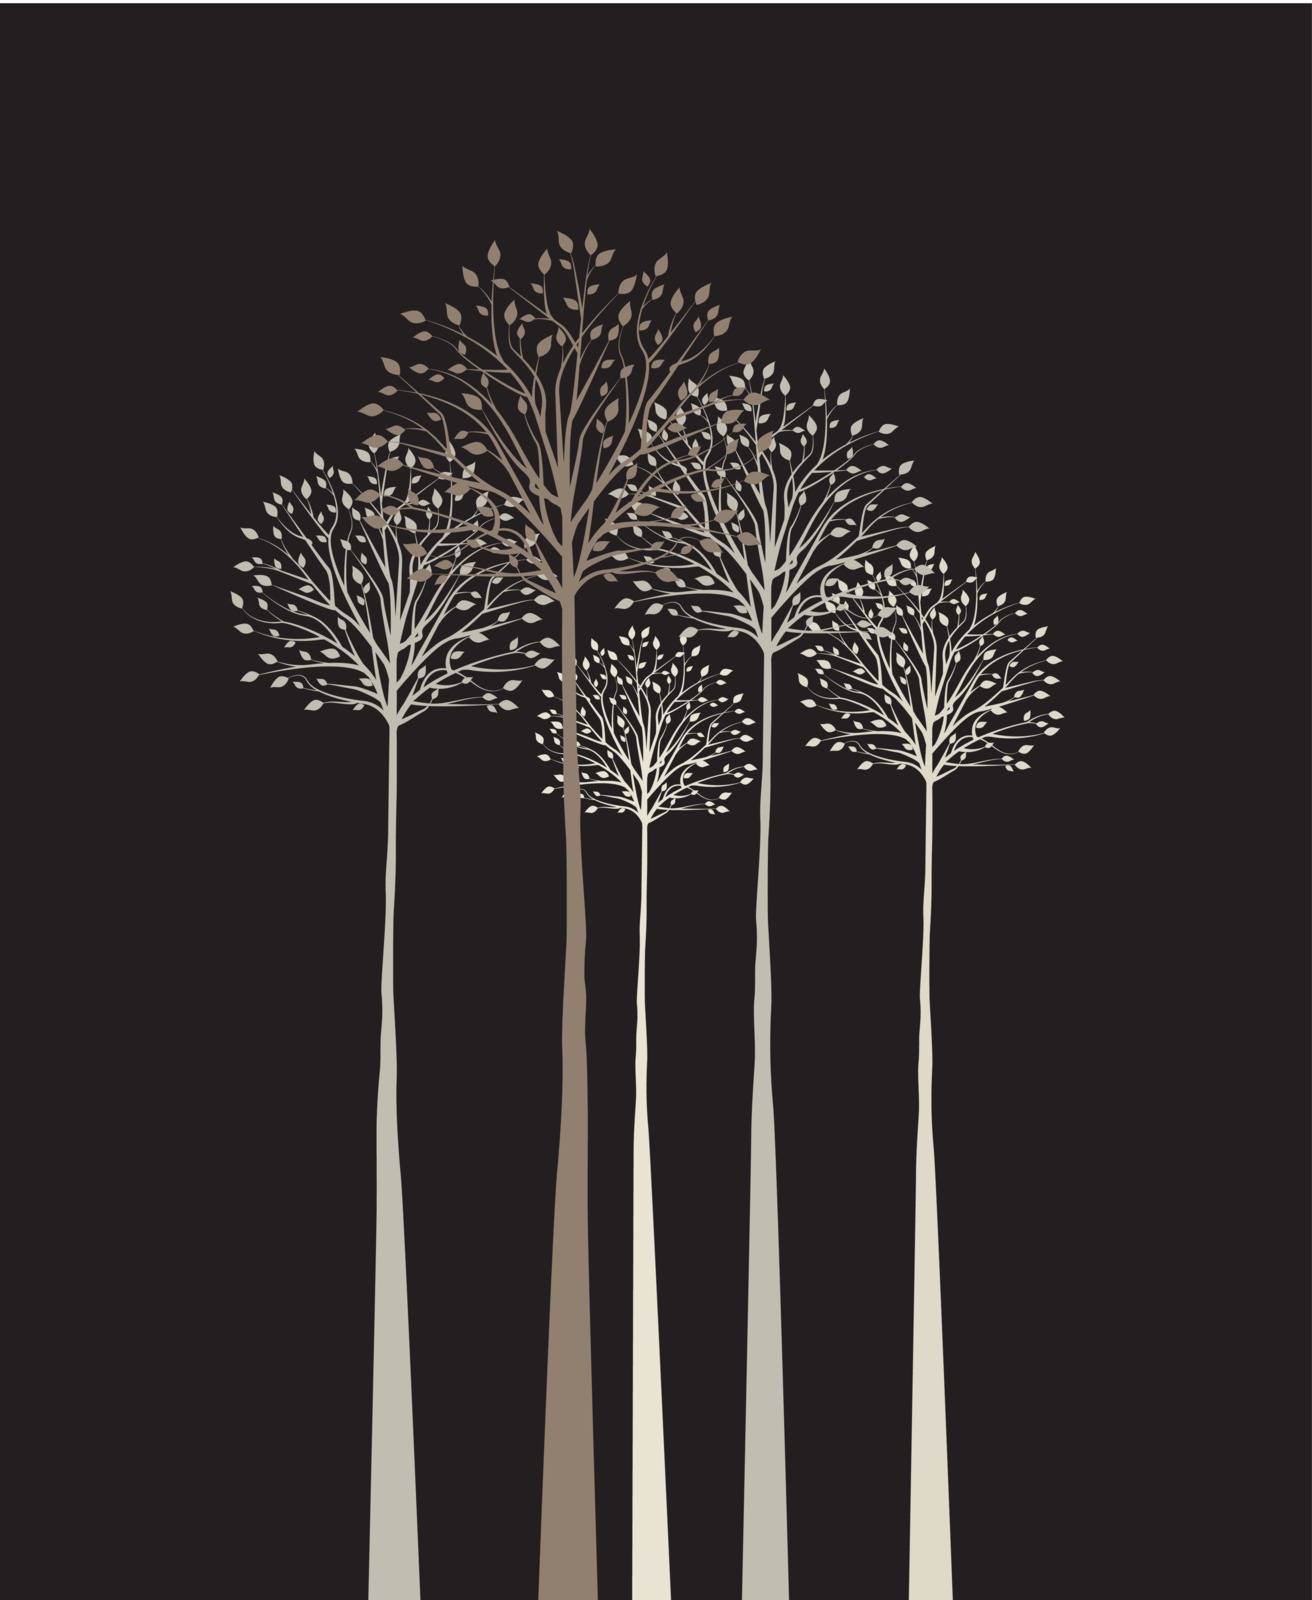 Group of trees on a dark background